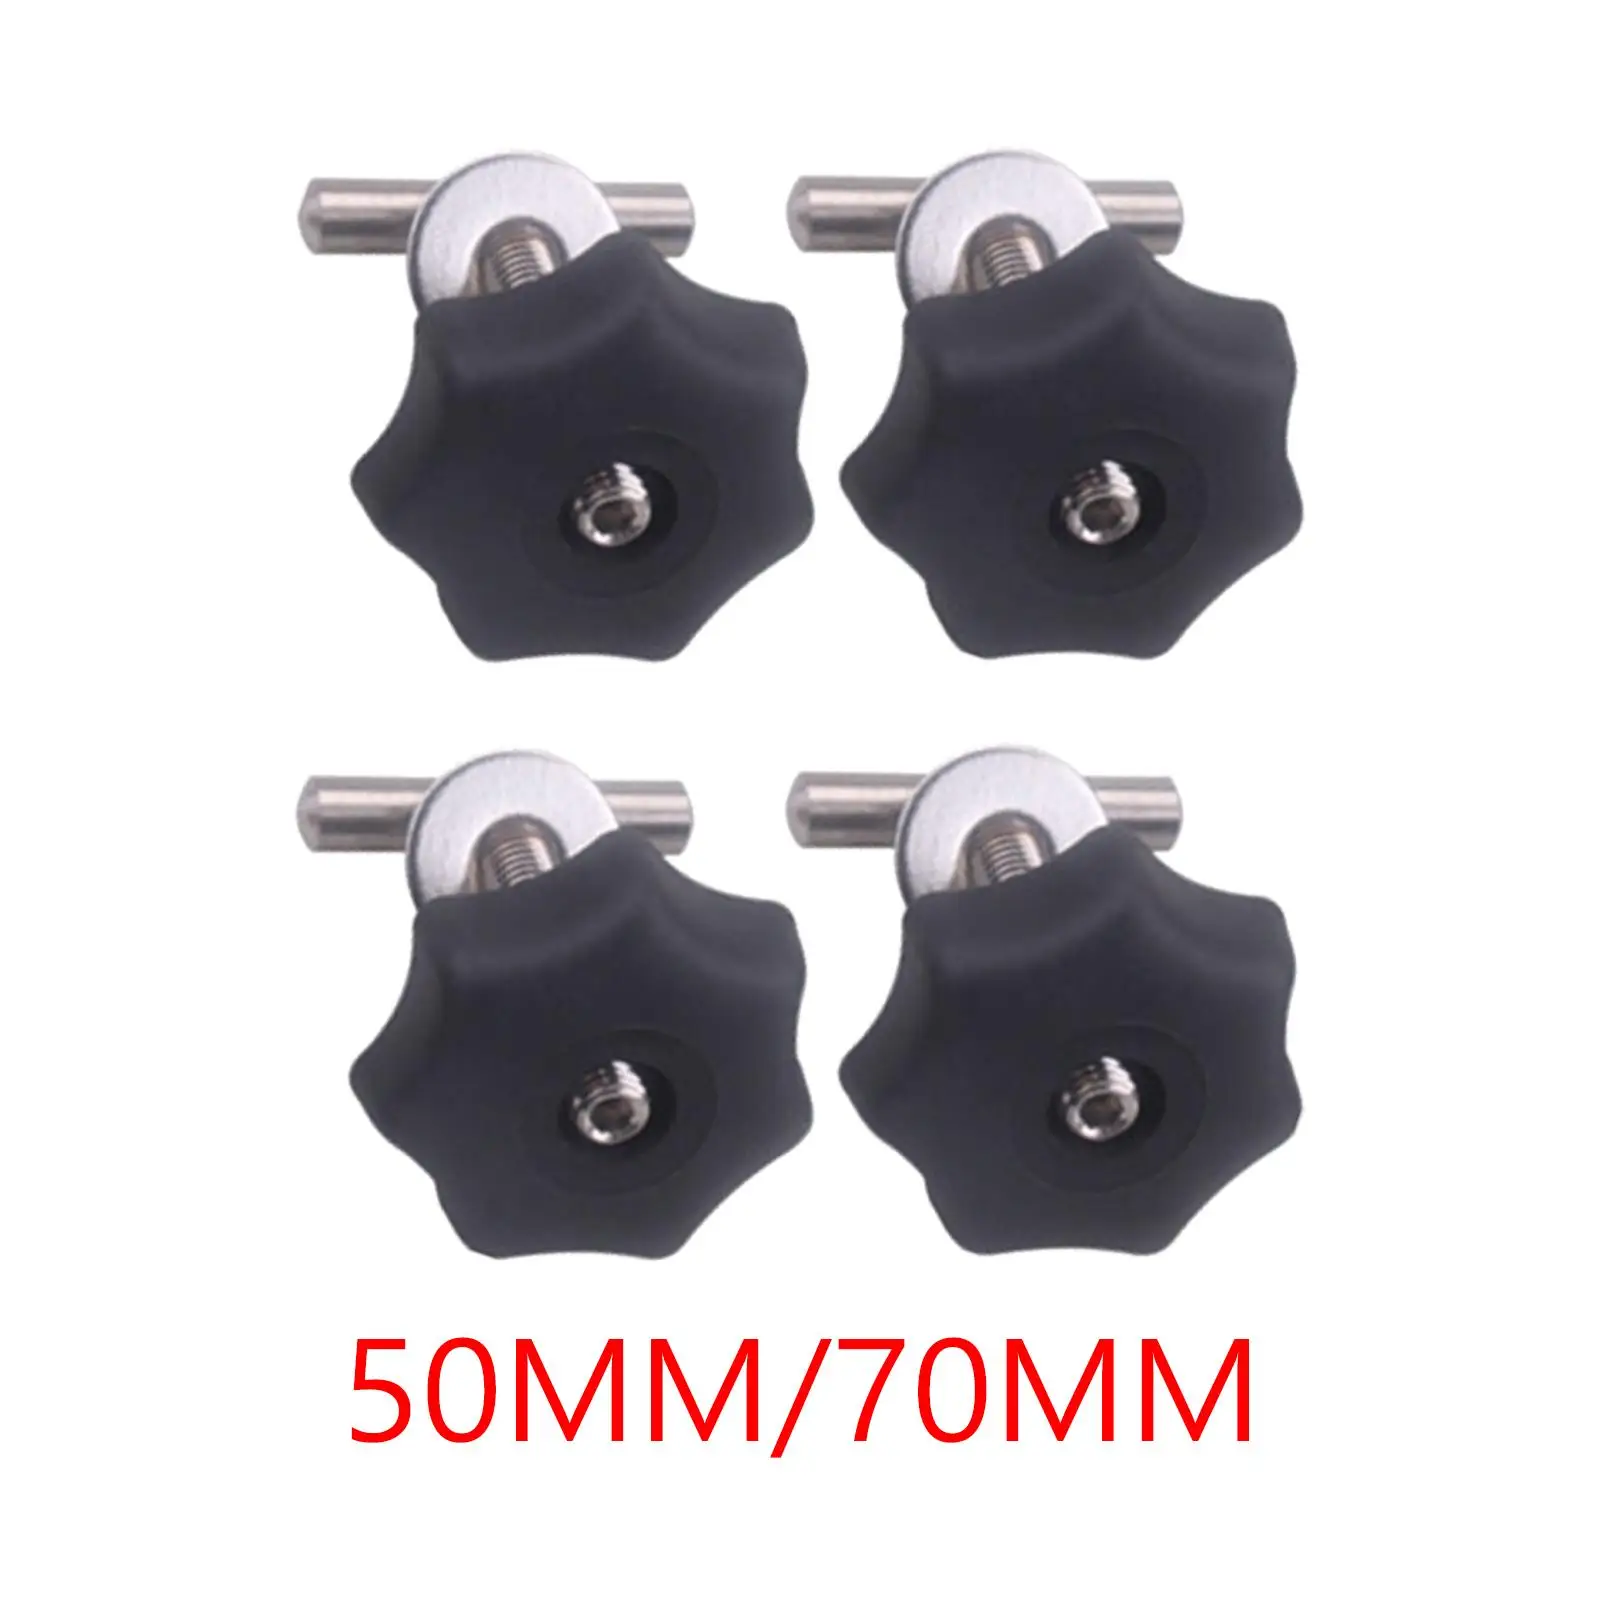 4x Mounting Screws Vehicle Parts Nut Set Stainless Supplies Durable Easy to Intall 50mm/70mm for vw T5 Upgrade